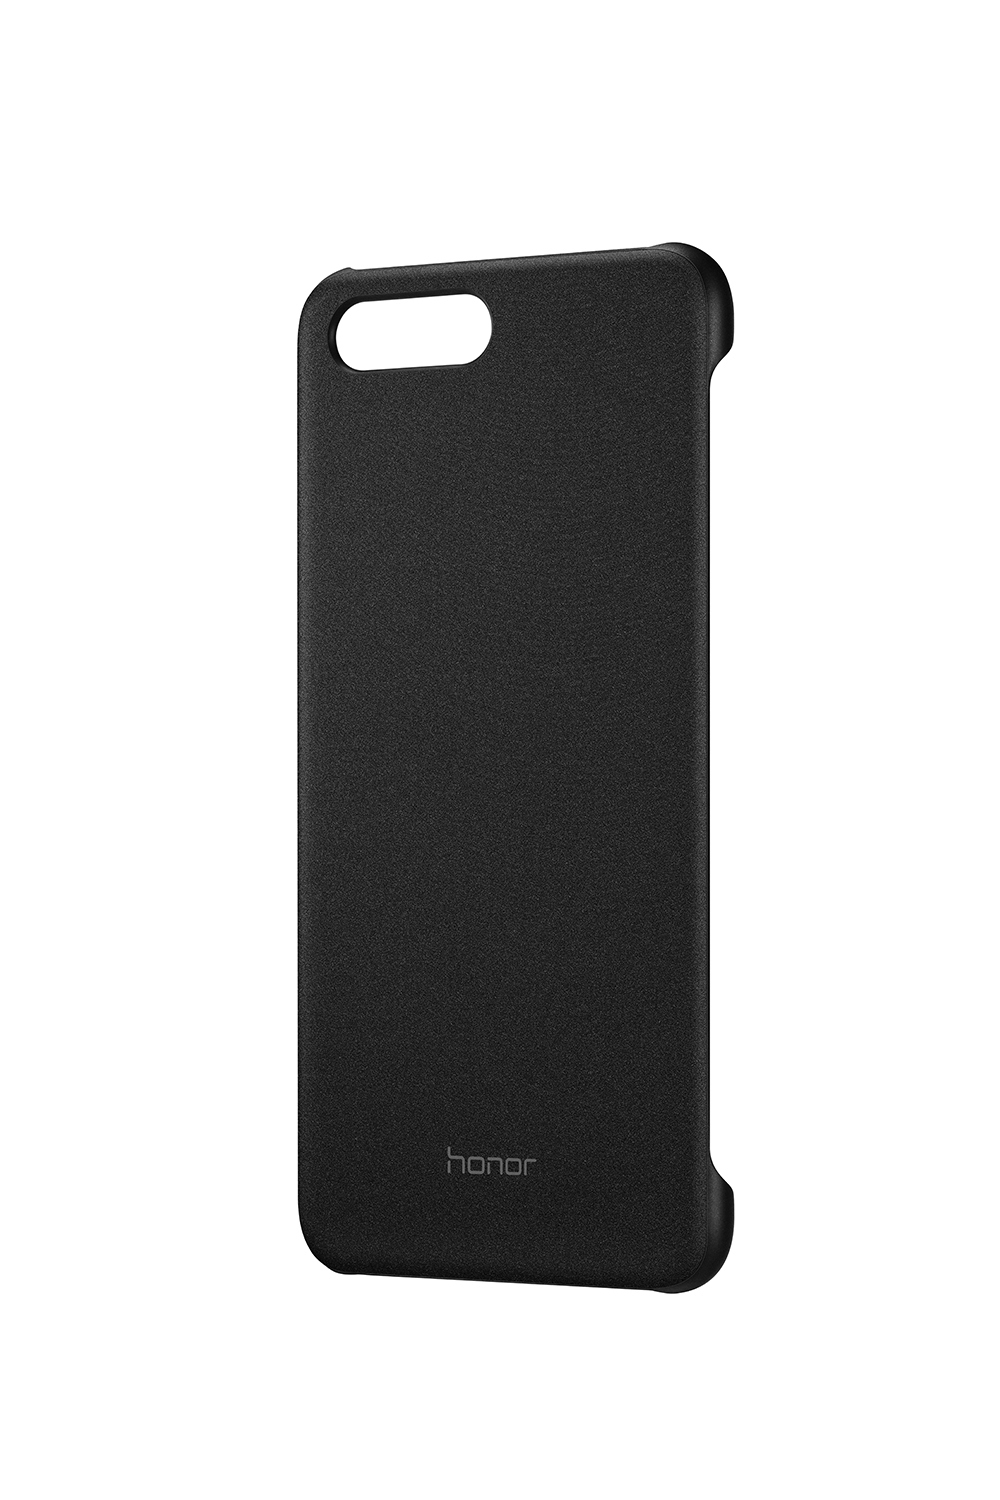 View Schwarz Magnet, PU HONOR Backcover, Honor, 10,